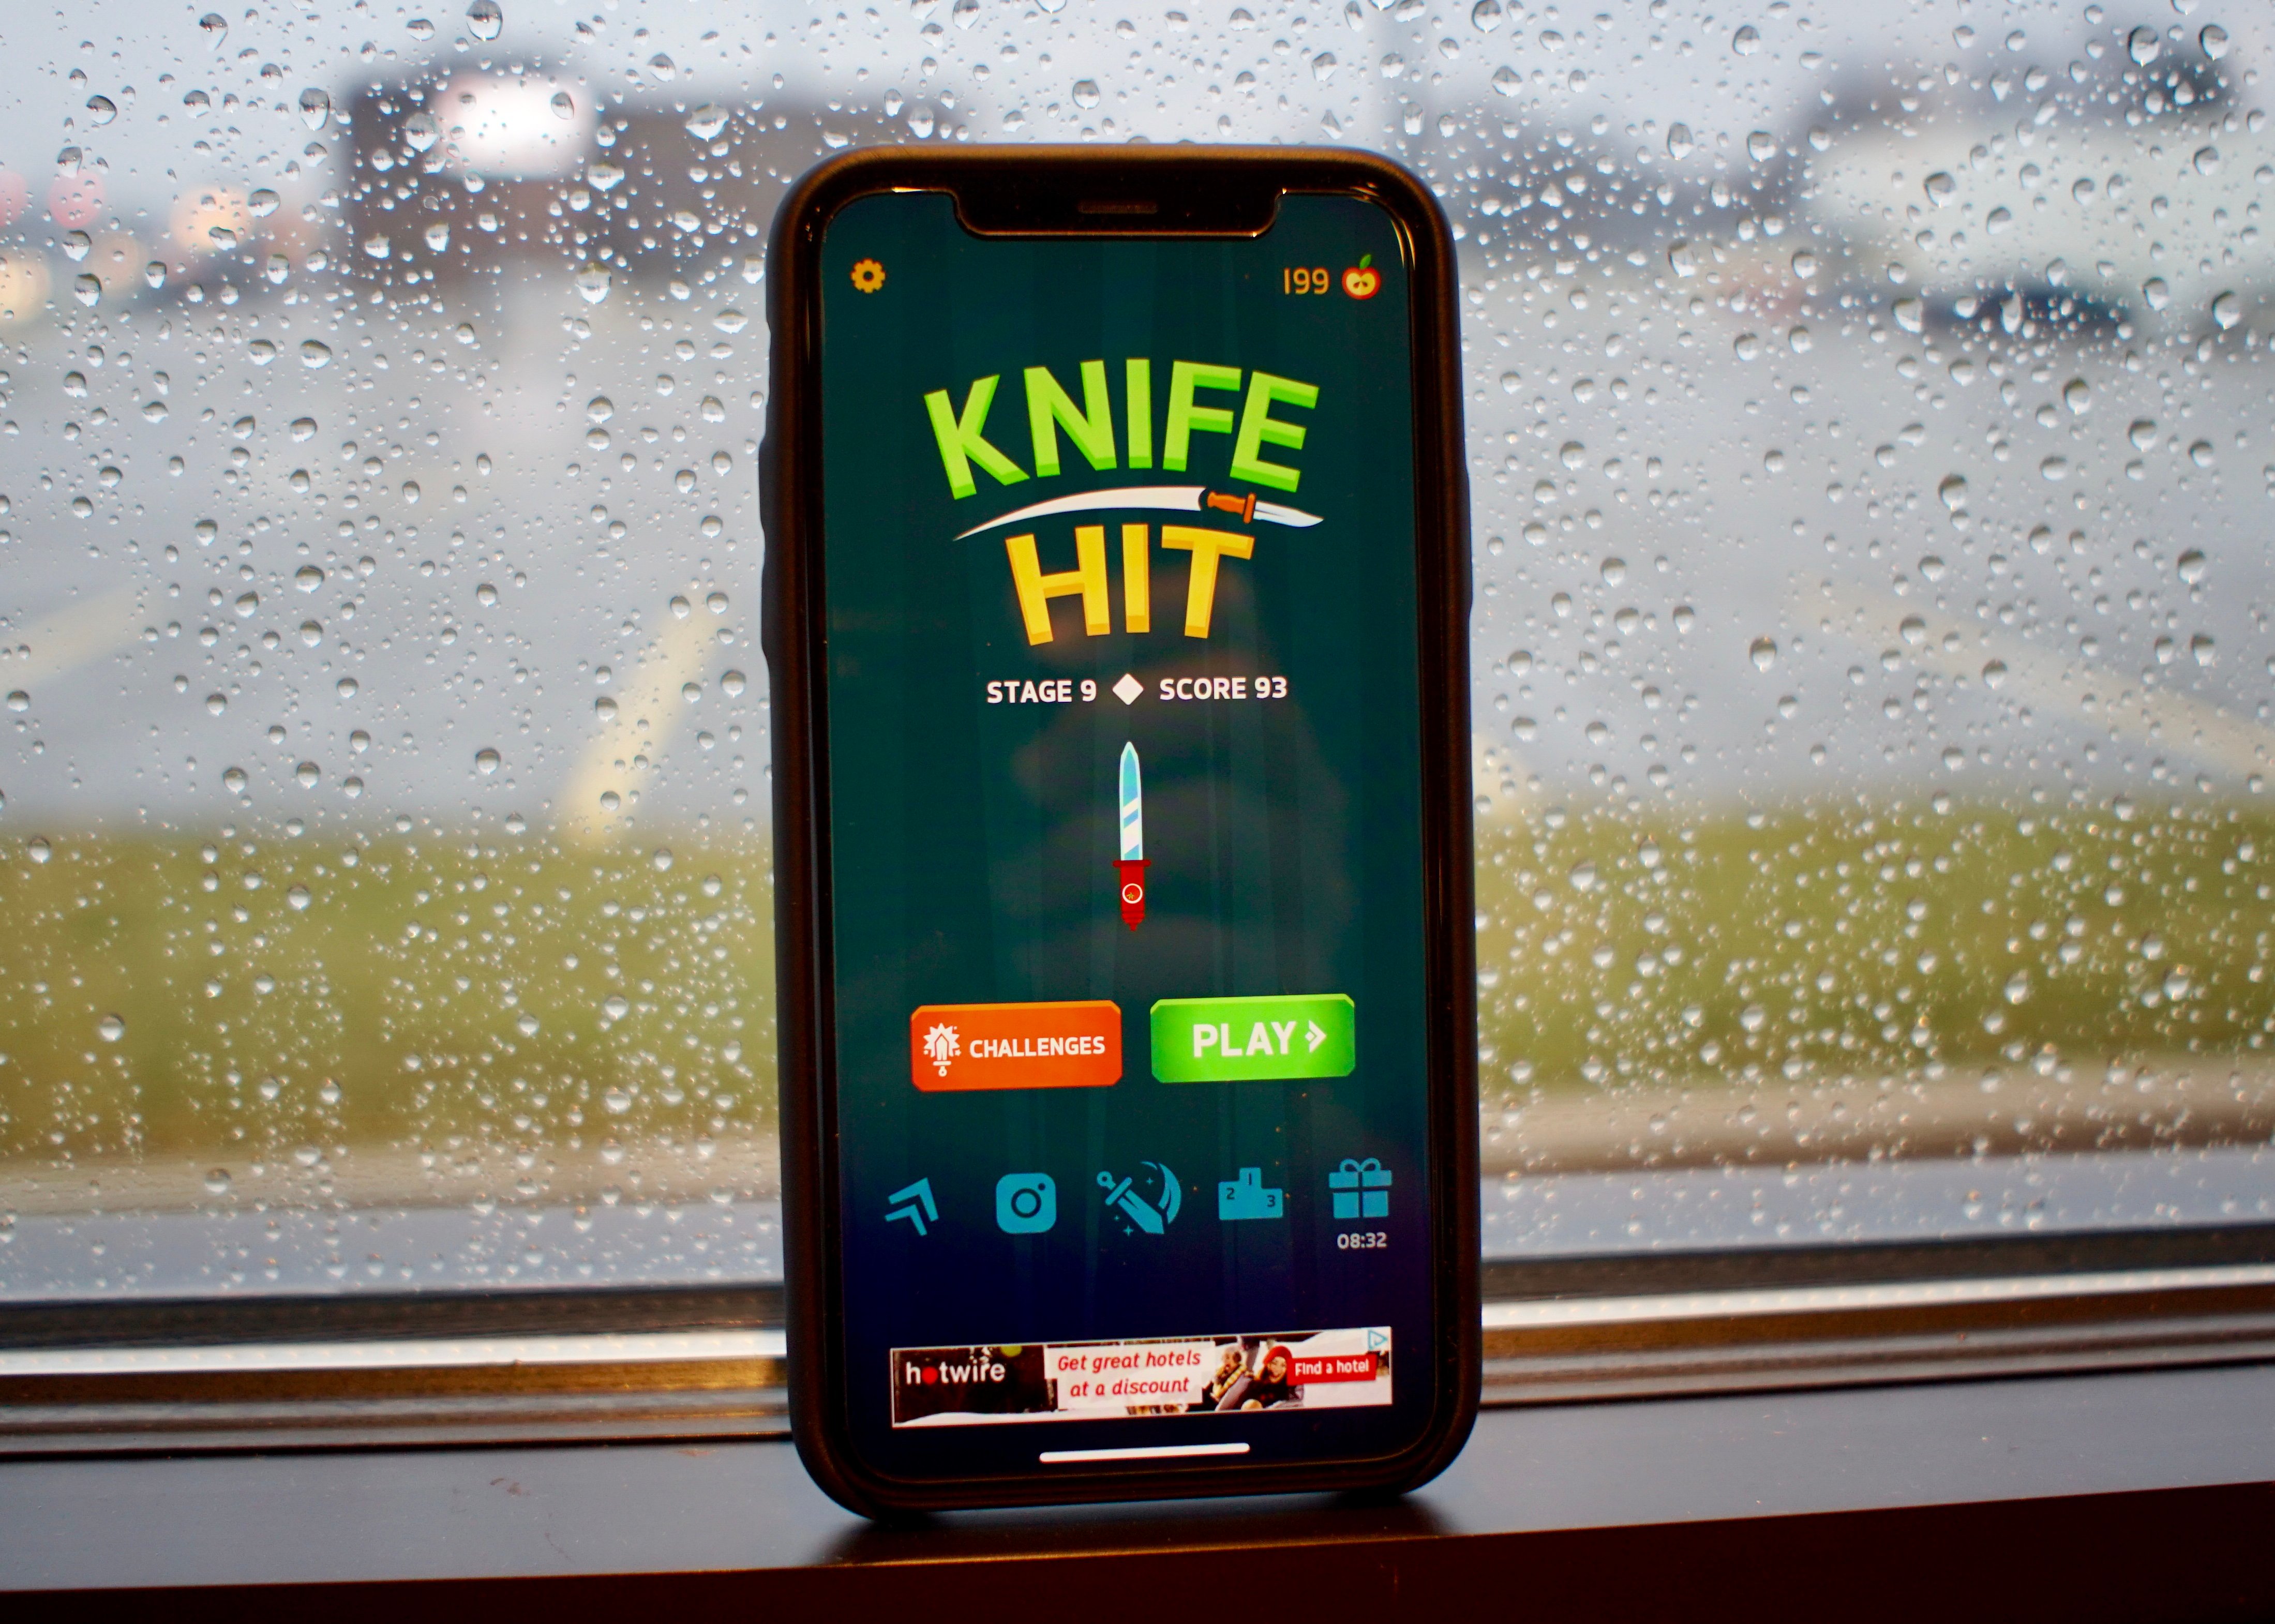 What you need to know about the Knife Hit app.